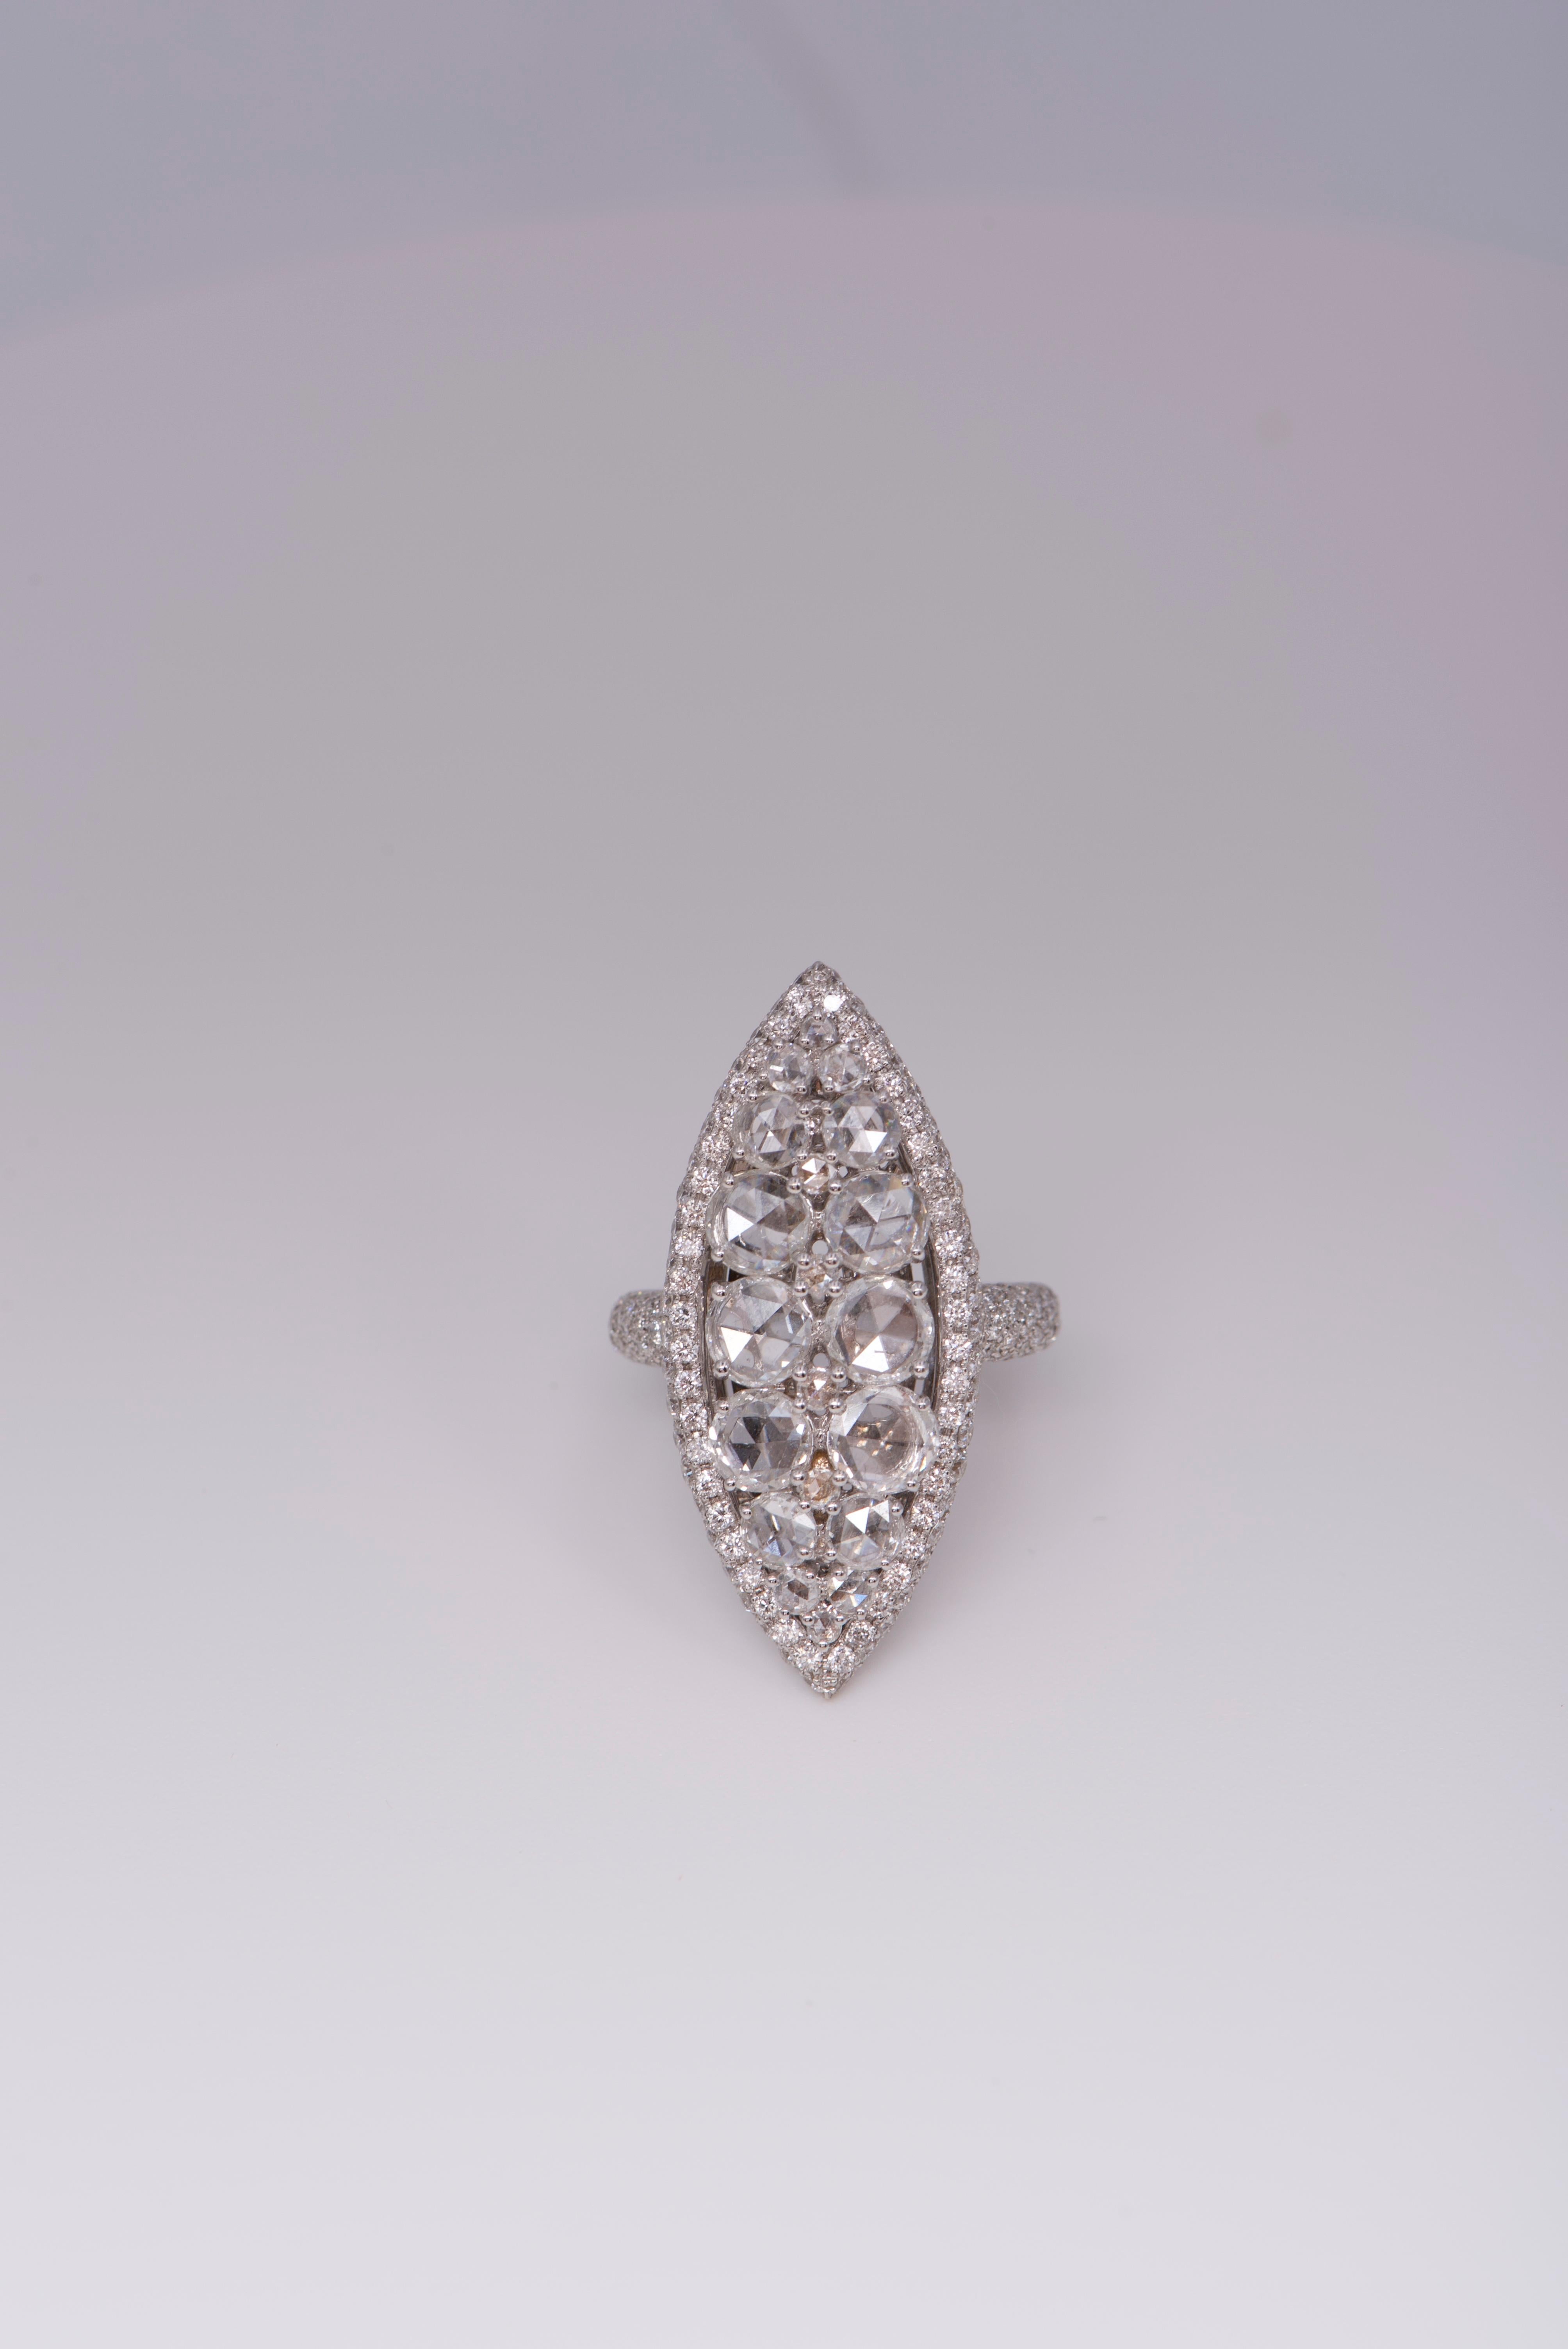 Adamas navette ring in 18K white gold with approximately 3.76 carats of diamonds in total. Diamonds are set in the center, along the border, and on the shank as well.  